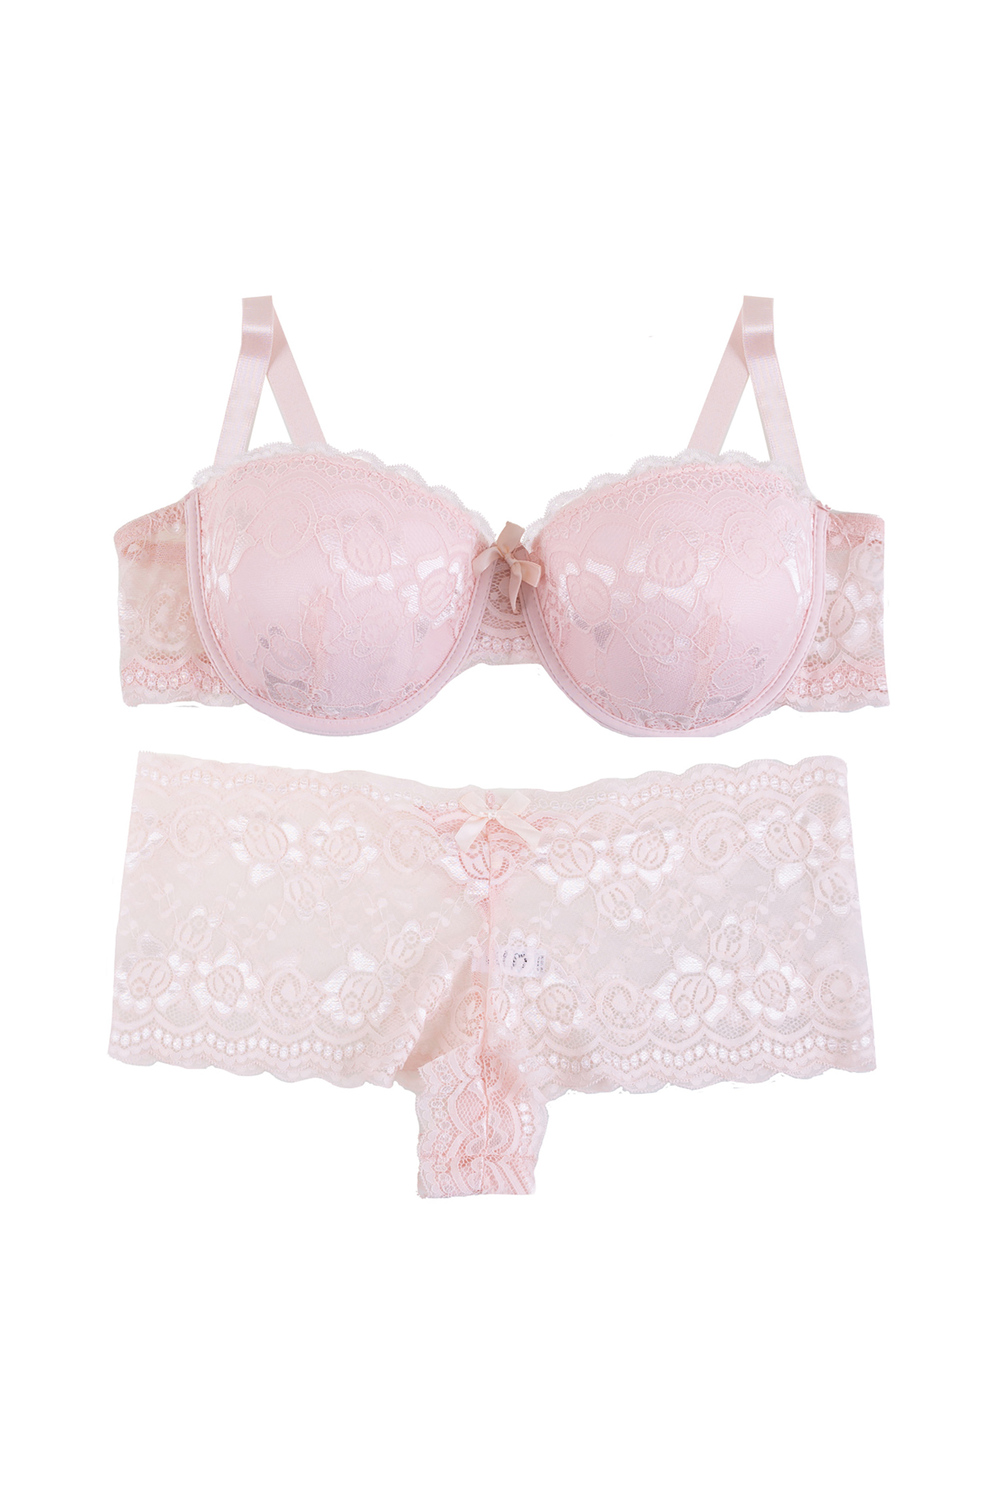 https://www.rossy.ca/media/A2W/products/plunging-lace-push-up-demi-bra-set-blush-plus-size-76671-1.jpg